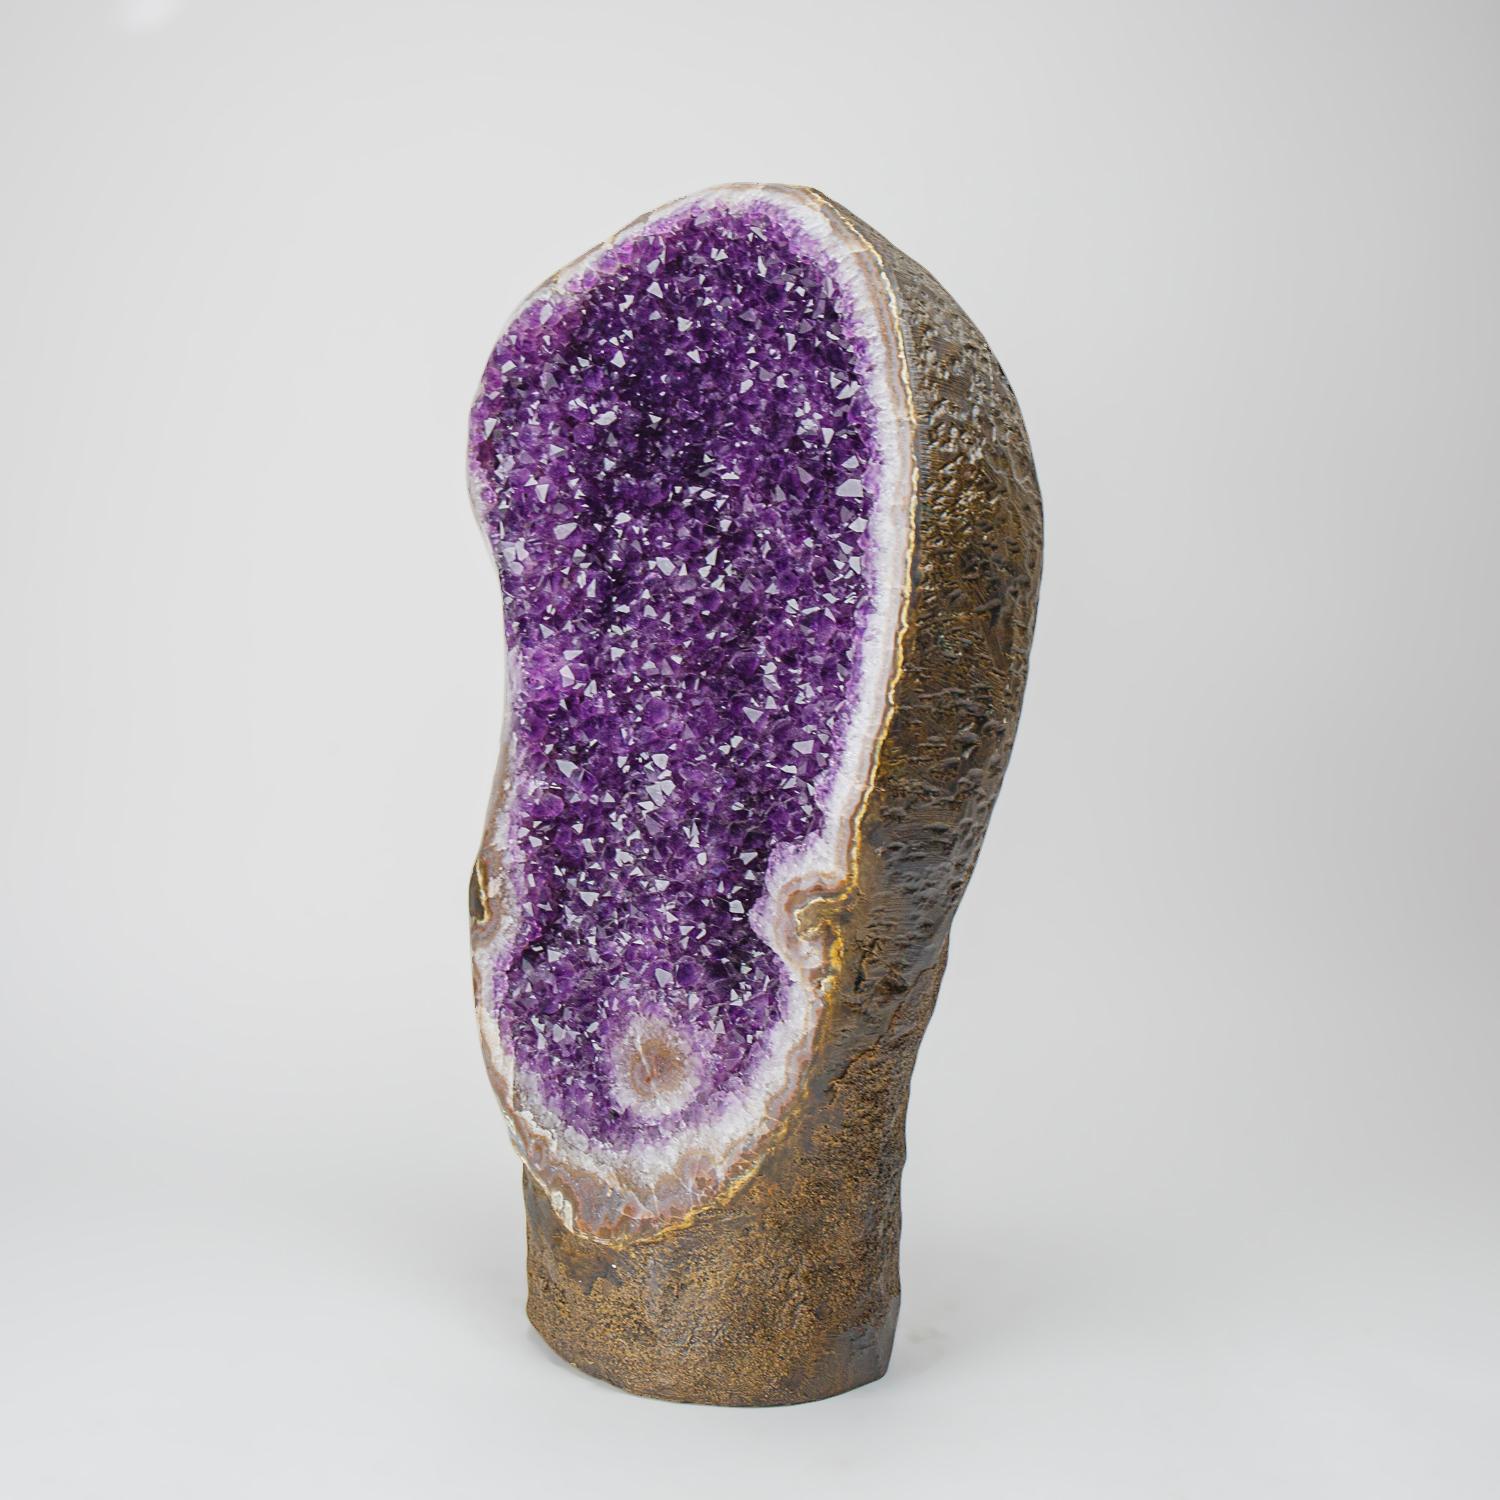 This Genuine Amethyst Cluster Geode from Uruguay is a top quality natural formation of gem amethyst. The half geode cathedral decor features lustrous fully terminated crystals with highly reflective faces and a deep, transparent to translucent grape